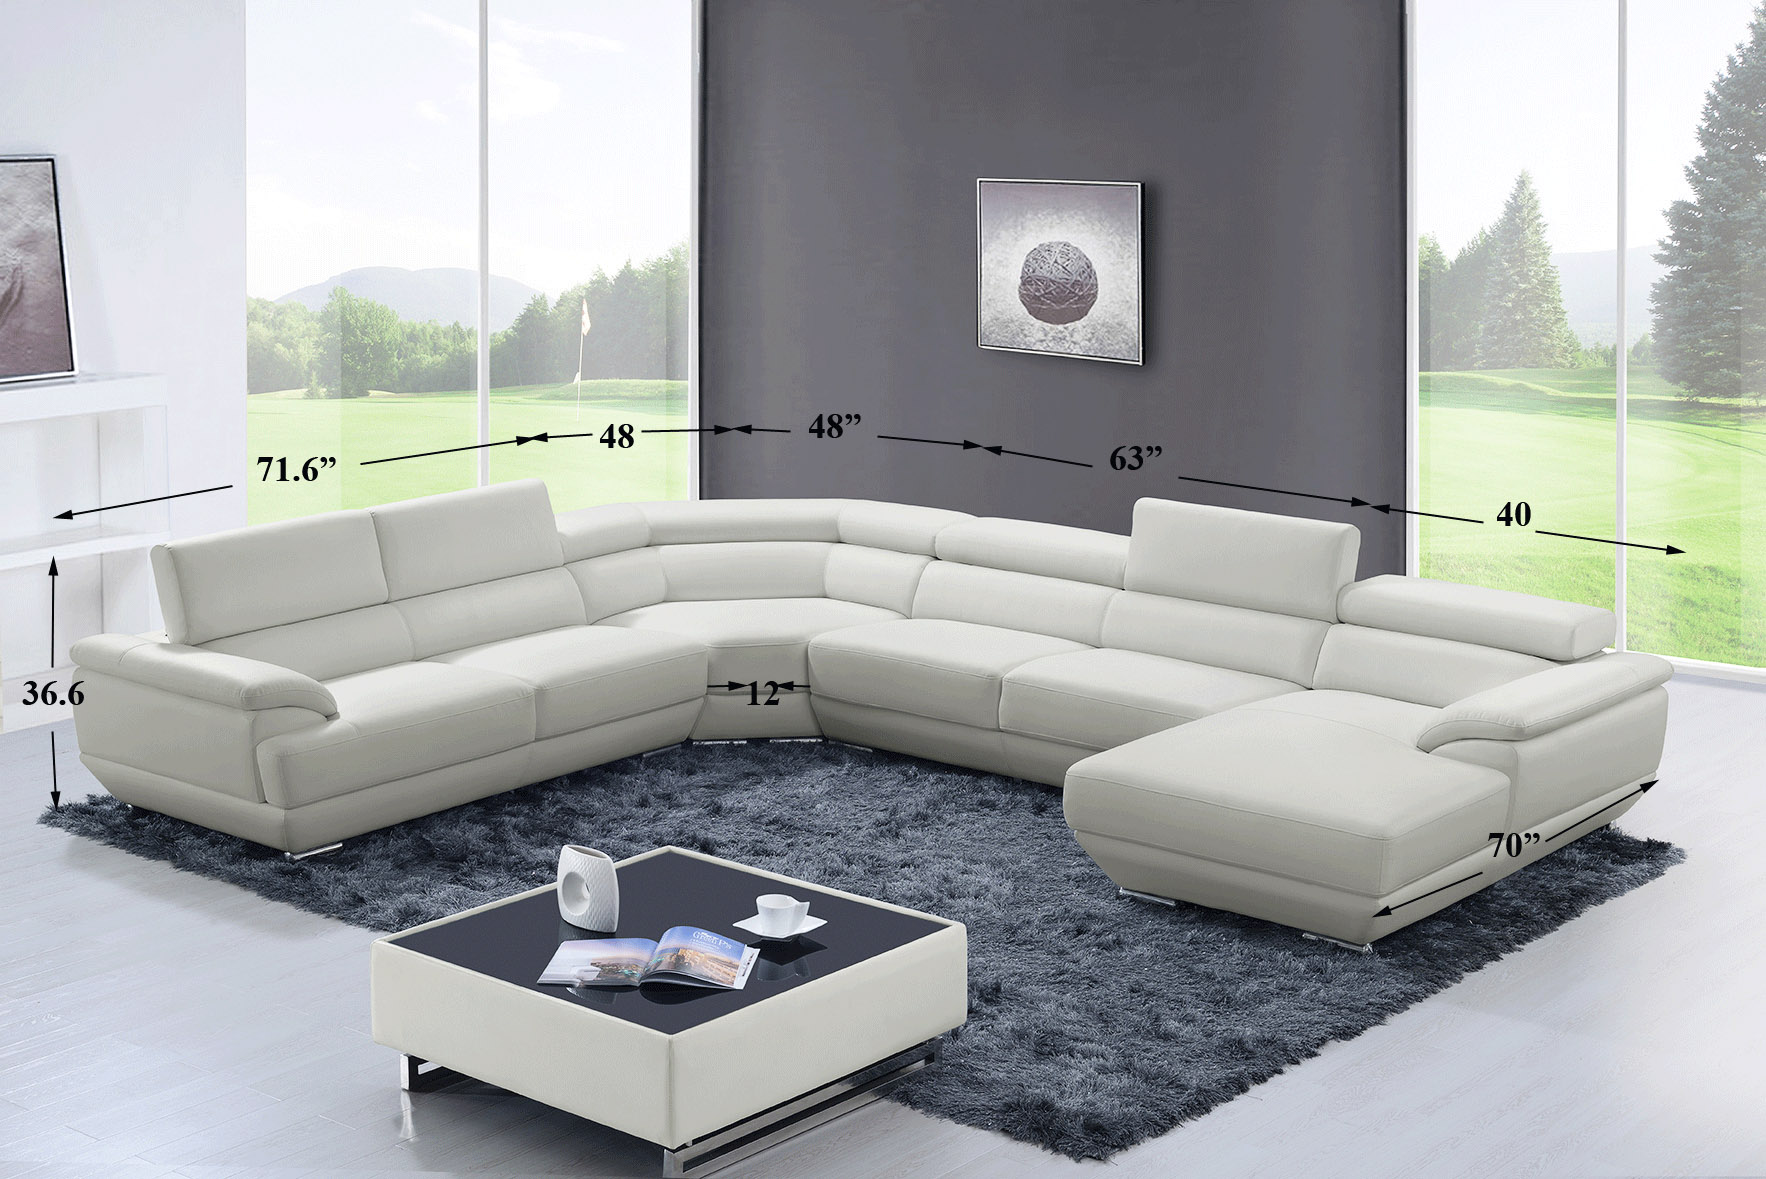 Sectional Upholstered in Real Leather with Comfortable Chaise Lounge